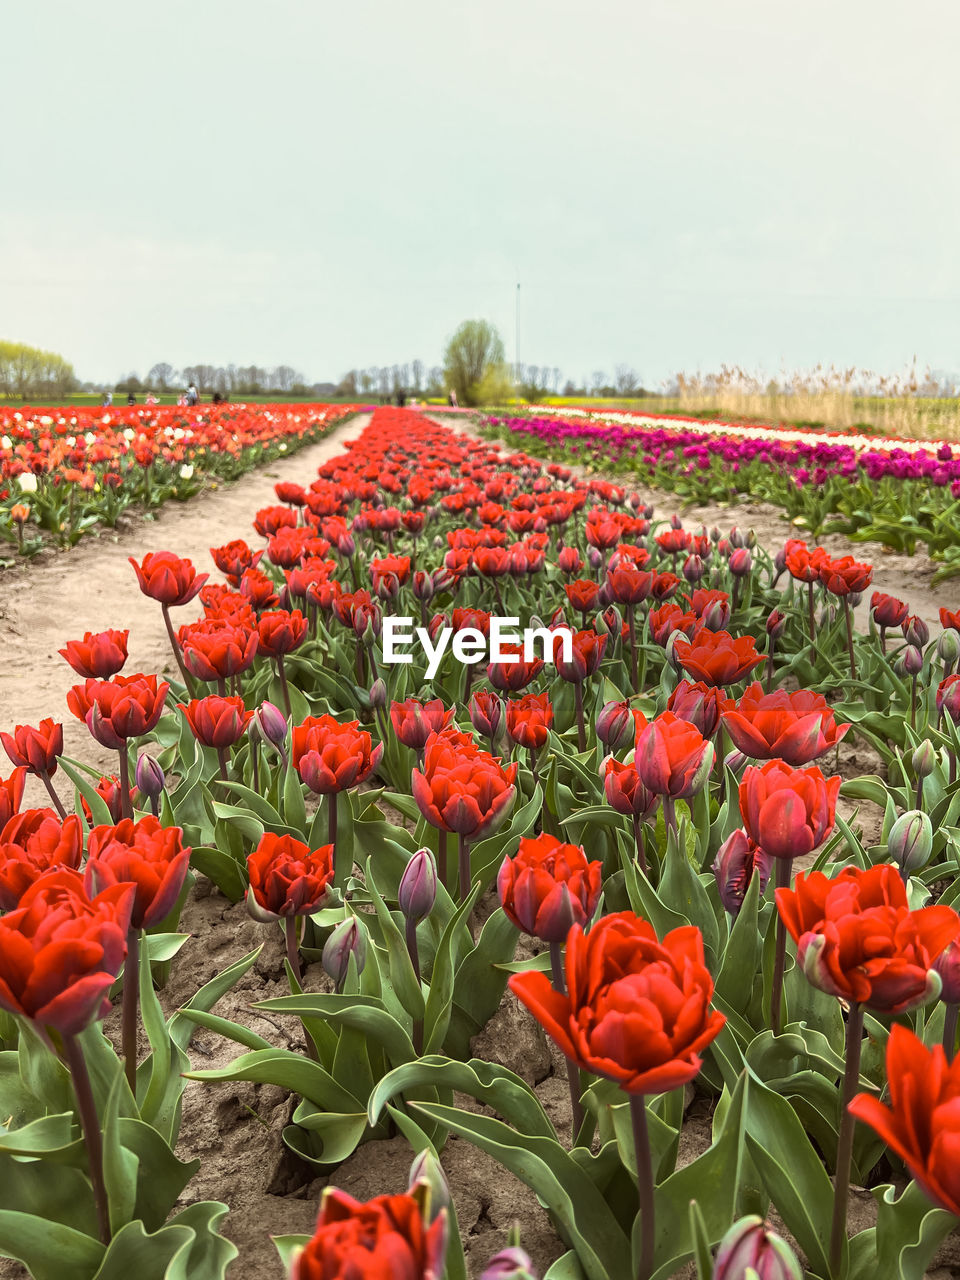 plant, flower, flowering plant, beauty in nature, freshness, nature, red, growth, tulip, sky, landscape, land, field, fragility, flowerbed, flower head, petal, environment, no people, inflorescence, agriculture, rural scene, abundance, botany, springtime, day, close-up, multi colored, outdoors, scenics - nature, cloud, tranquility, plant part, vibrant color, leaf, poppy, blossom, garden